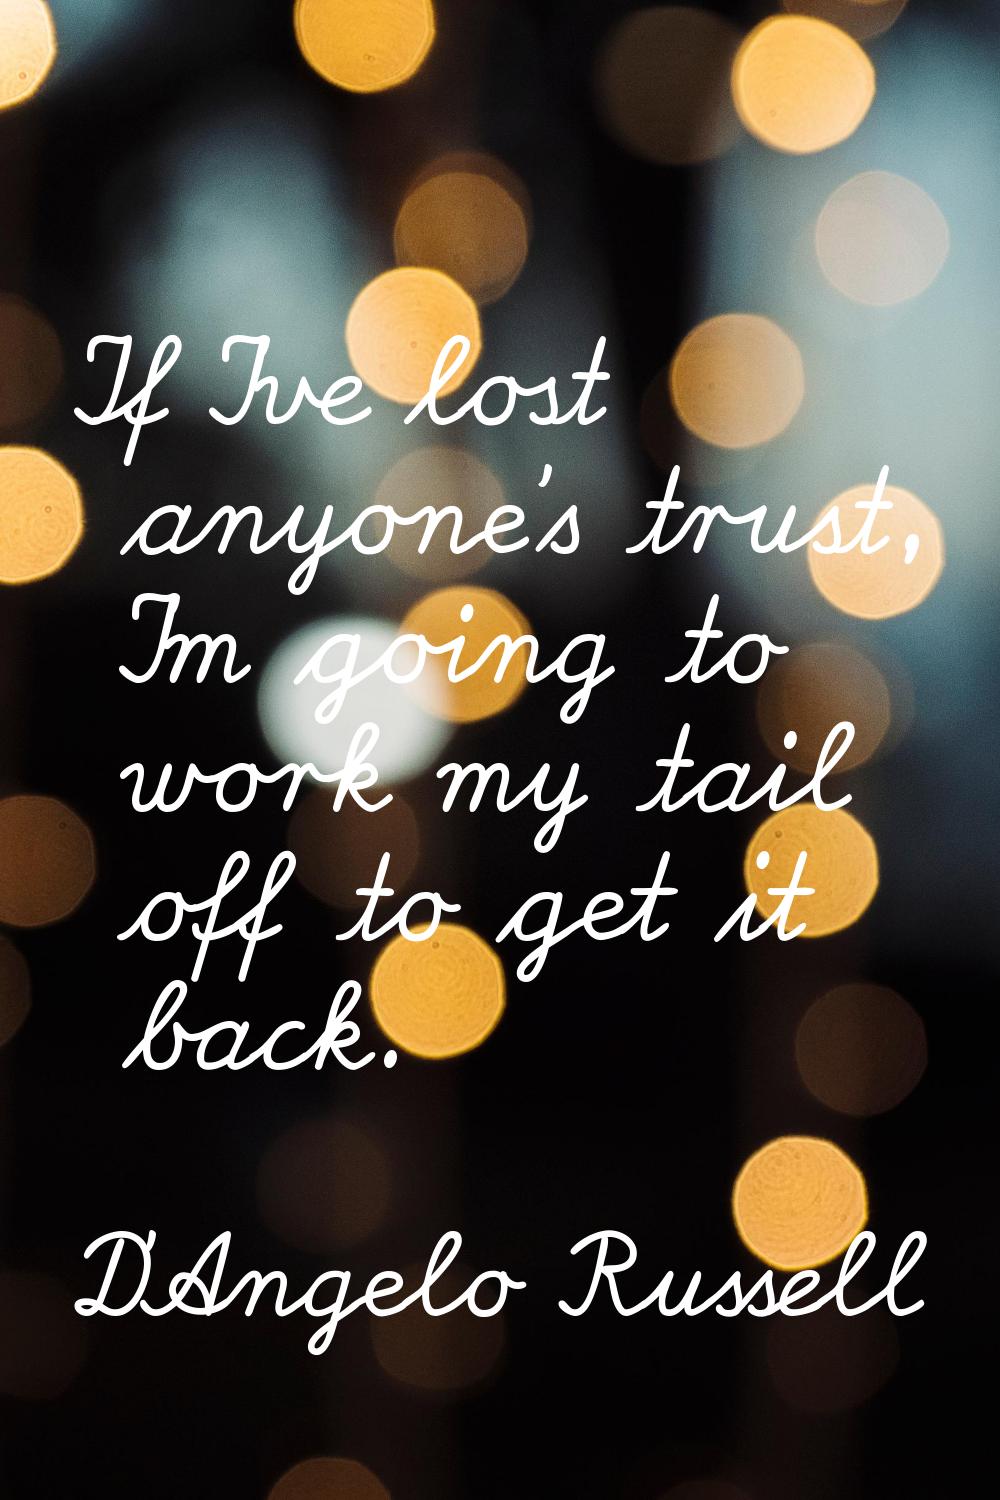 If I've lost anyone's trust, I'm going to work my tail off to get it back.